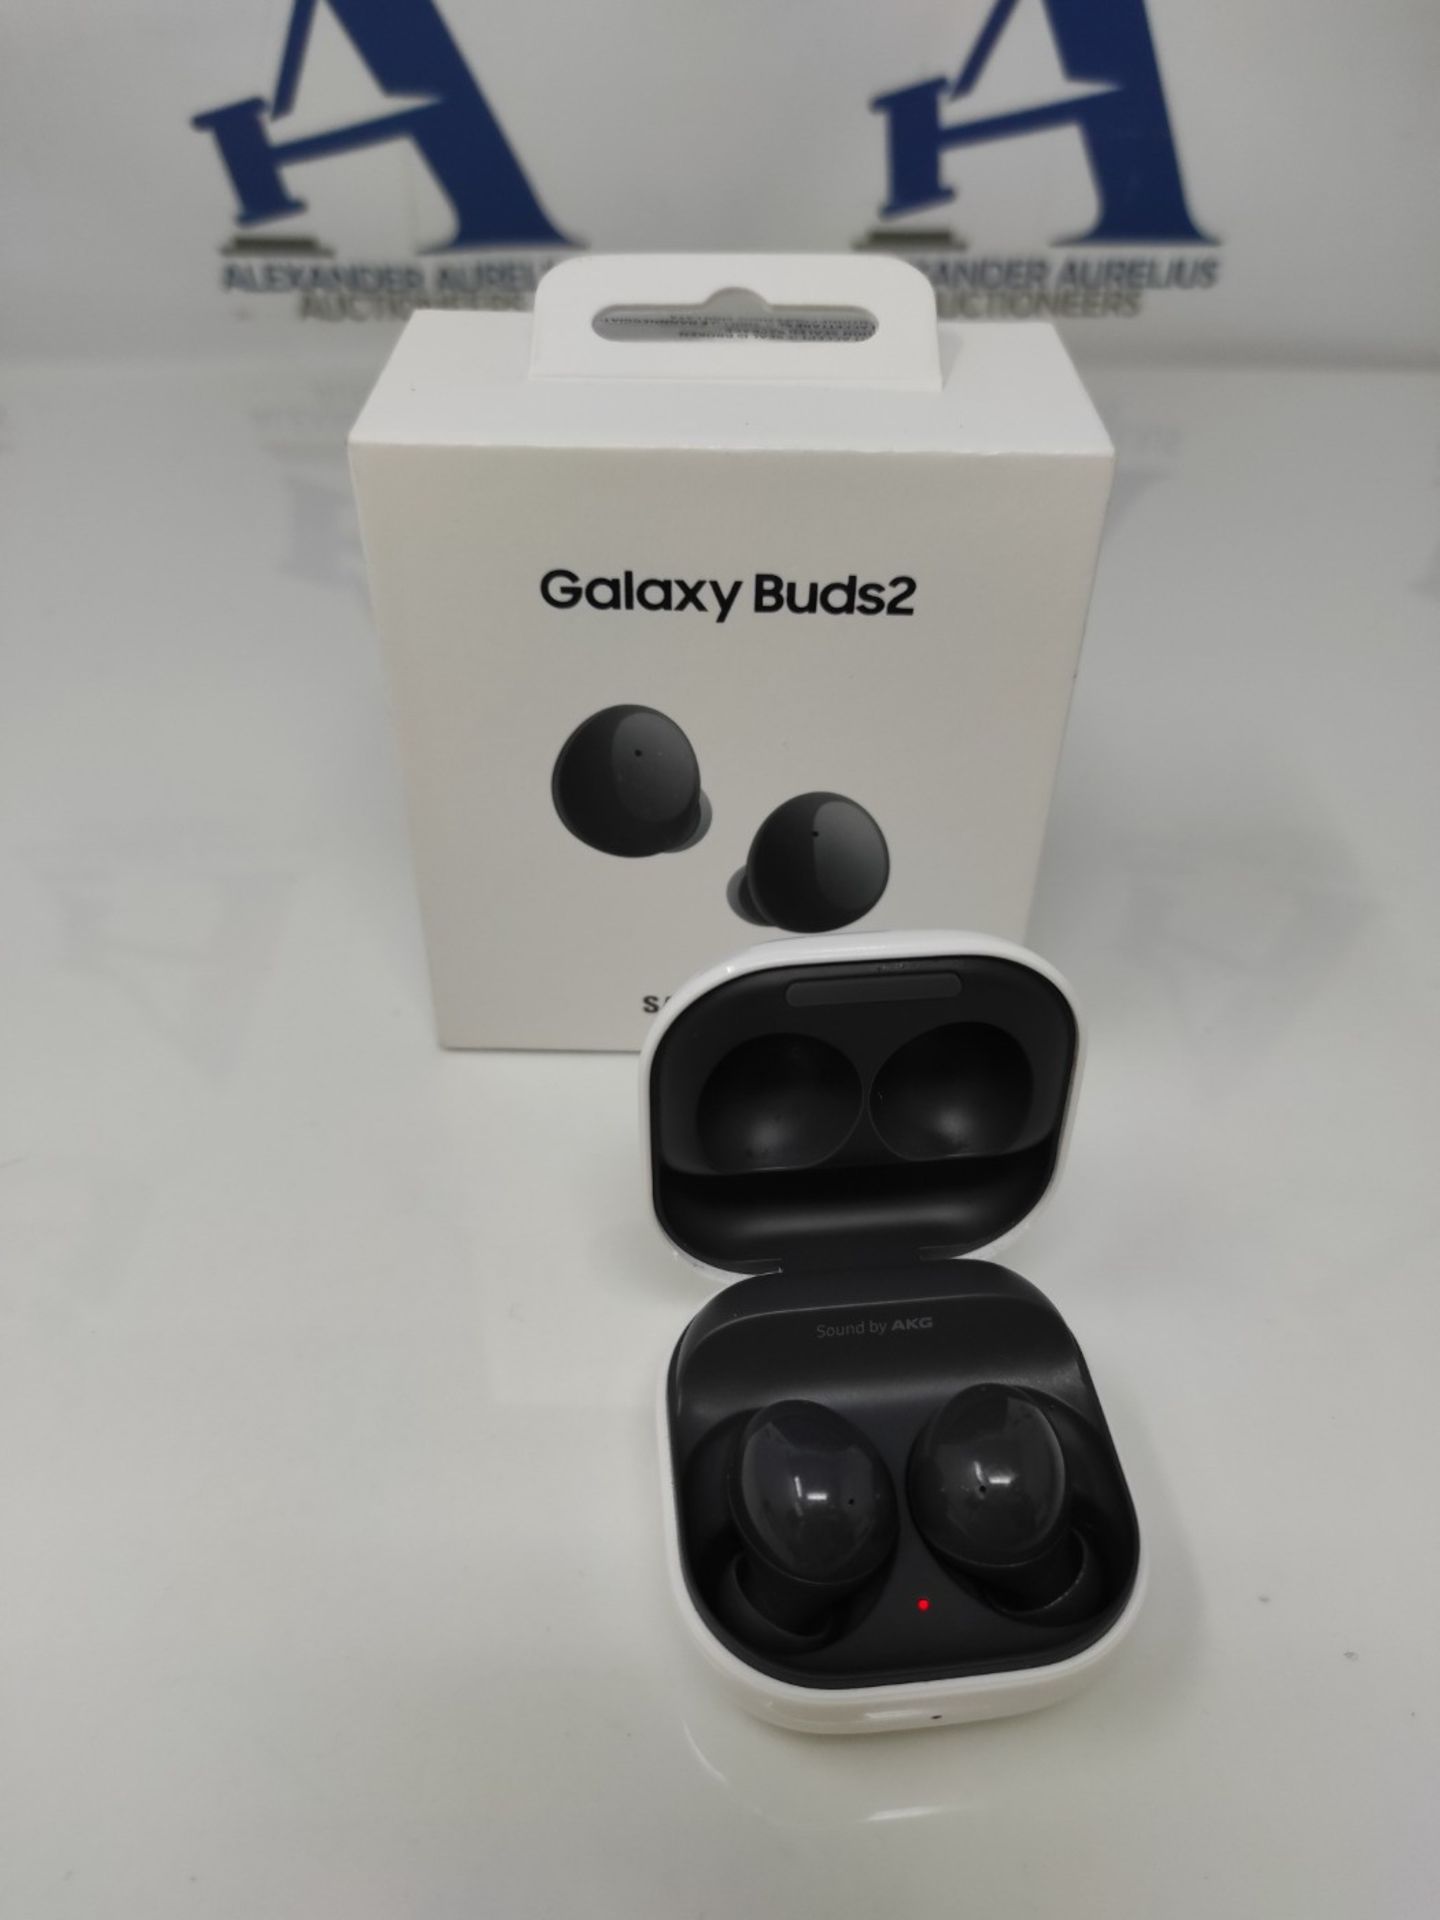 RRP £99.00 [INCOMPLETE] Samsung Galaxy Buds2 Wireless Earphones, 2 Year Extended Manufacturer War - Image 2 of 3